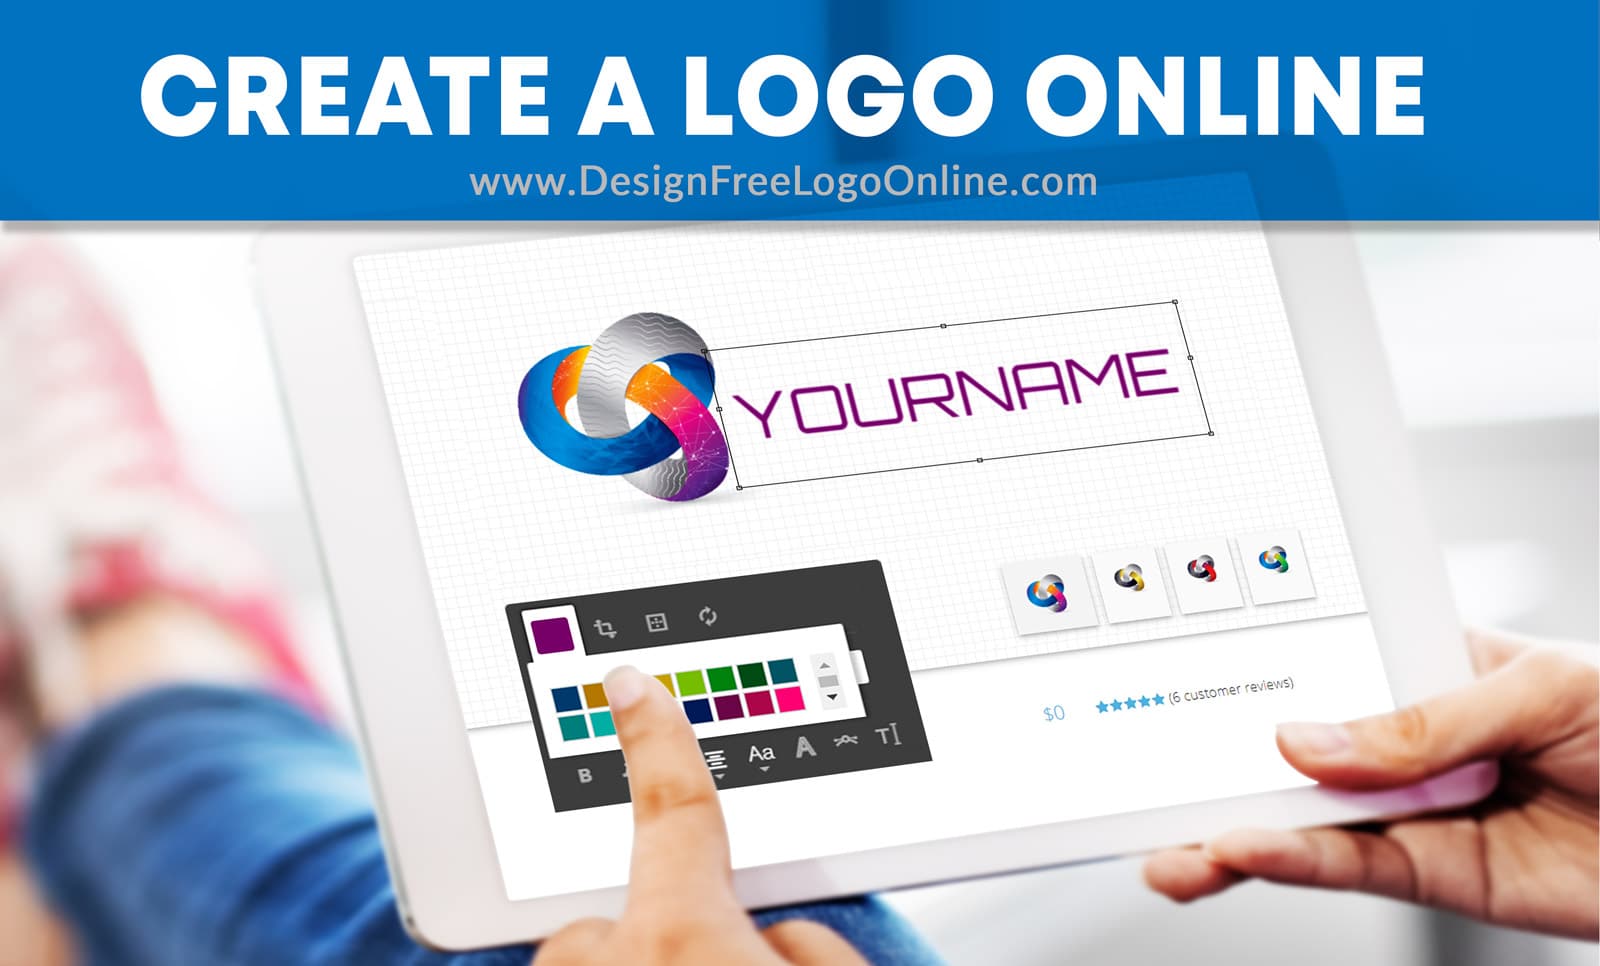 create-your-own-logo-design-ideas-with-free-logo-maker-images-and